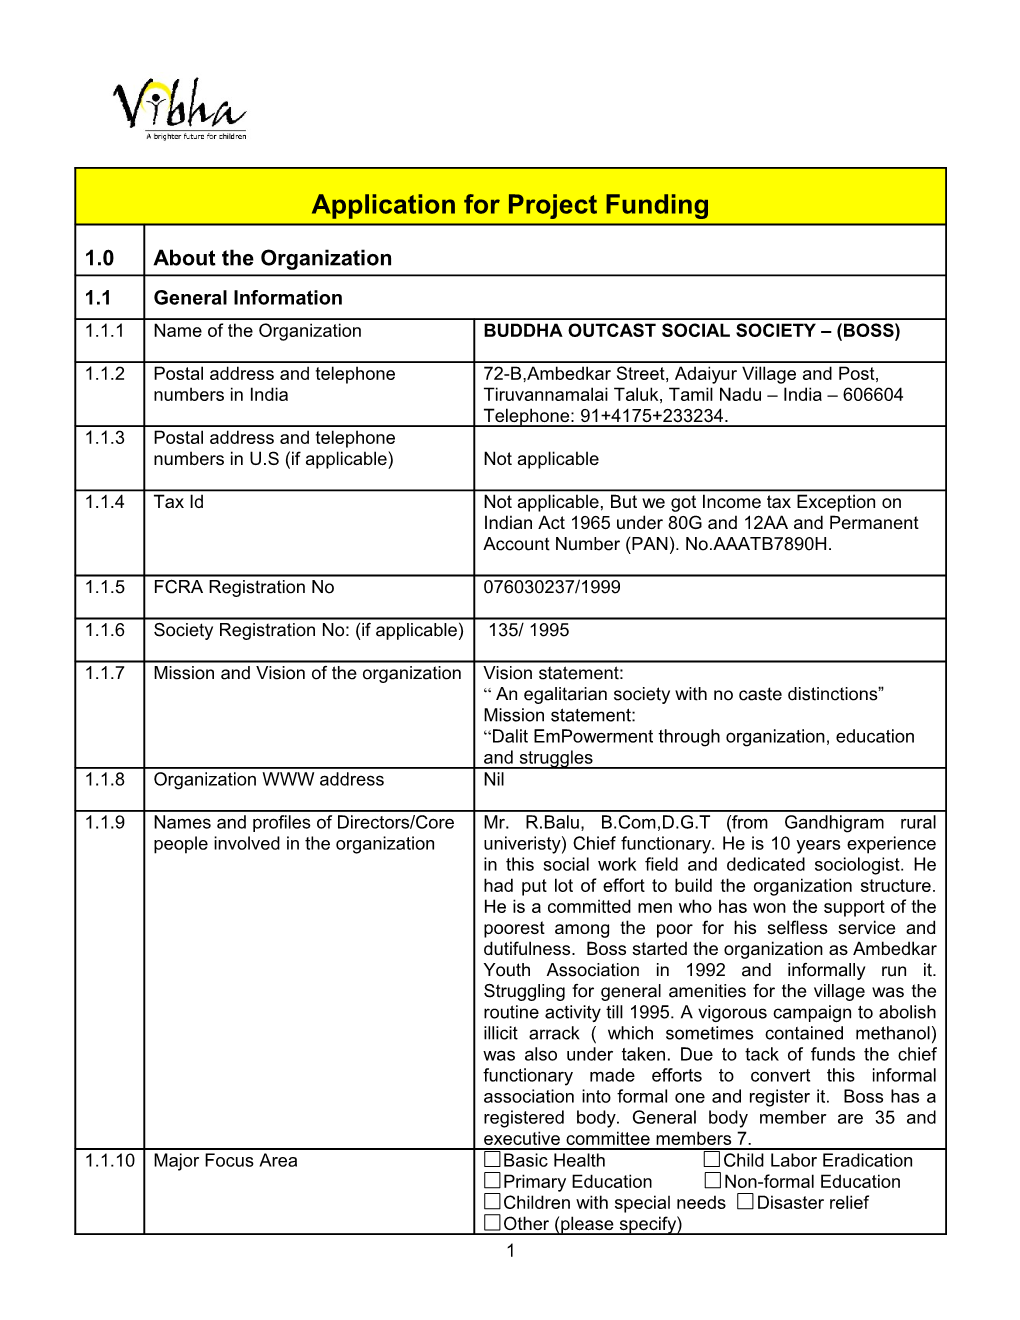 Application for Project Funding s17